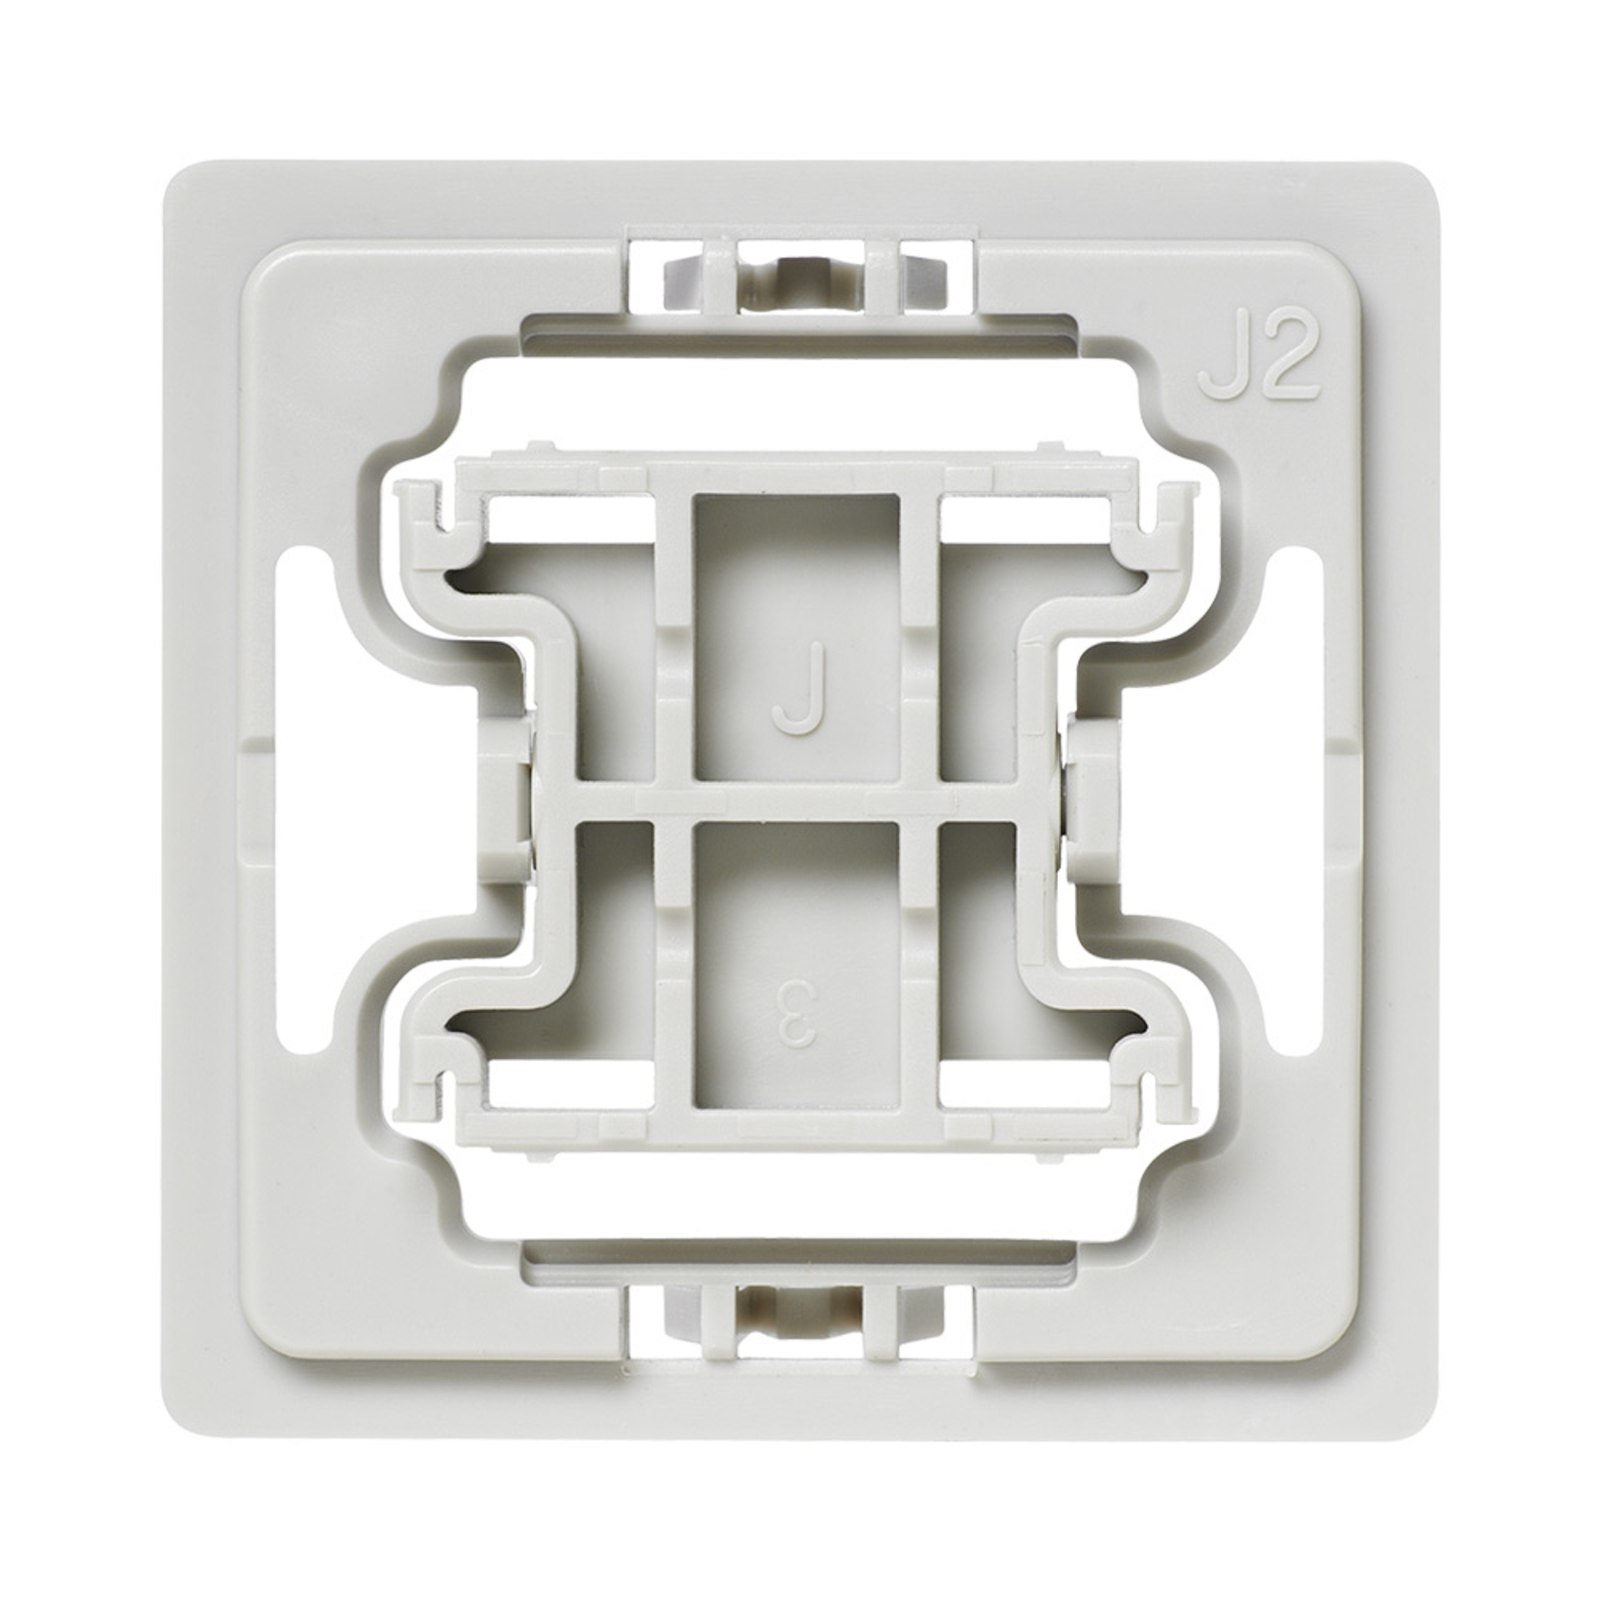 Homematic IP Adapter for Jung J2 switches 1x